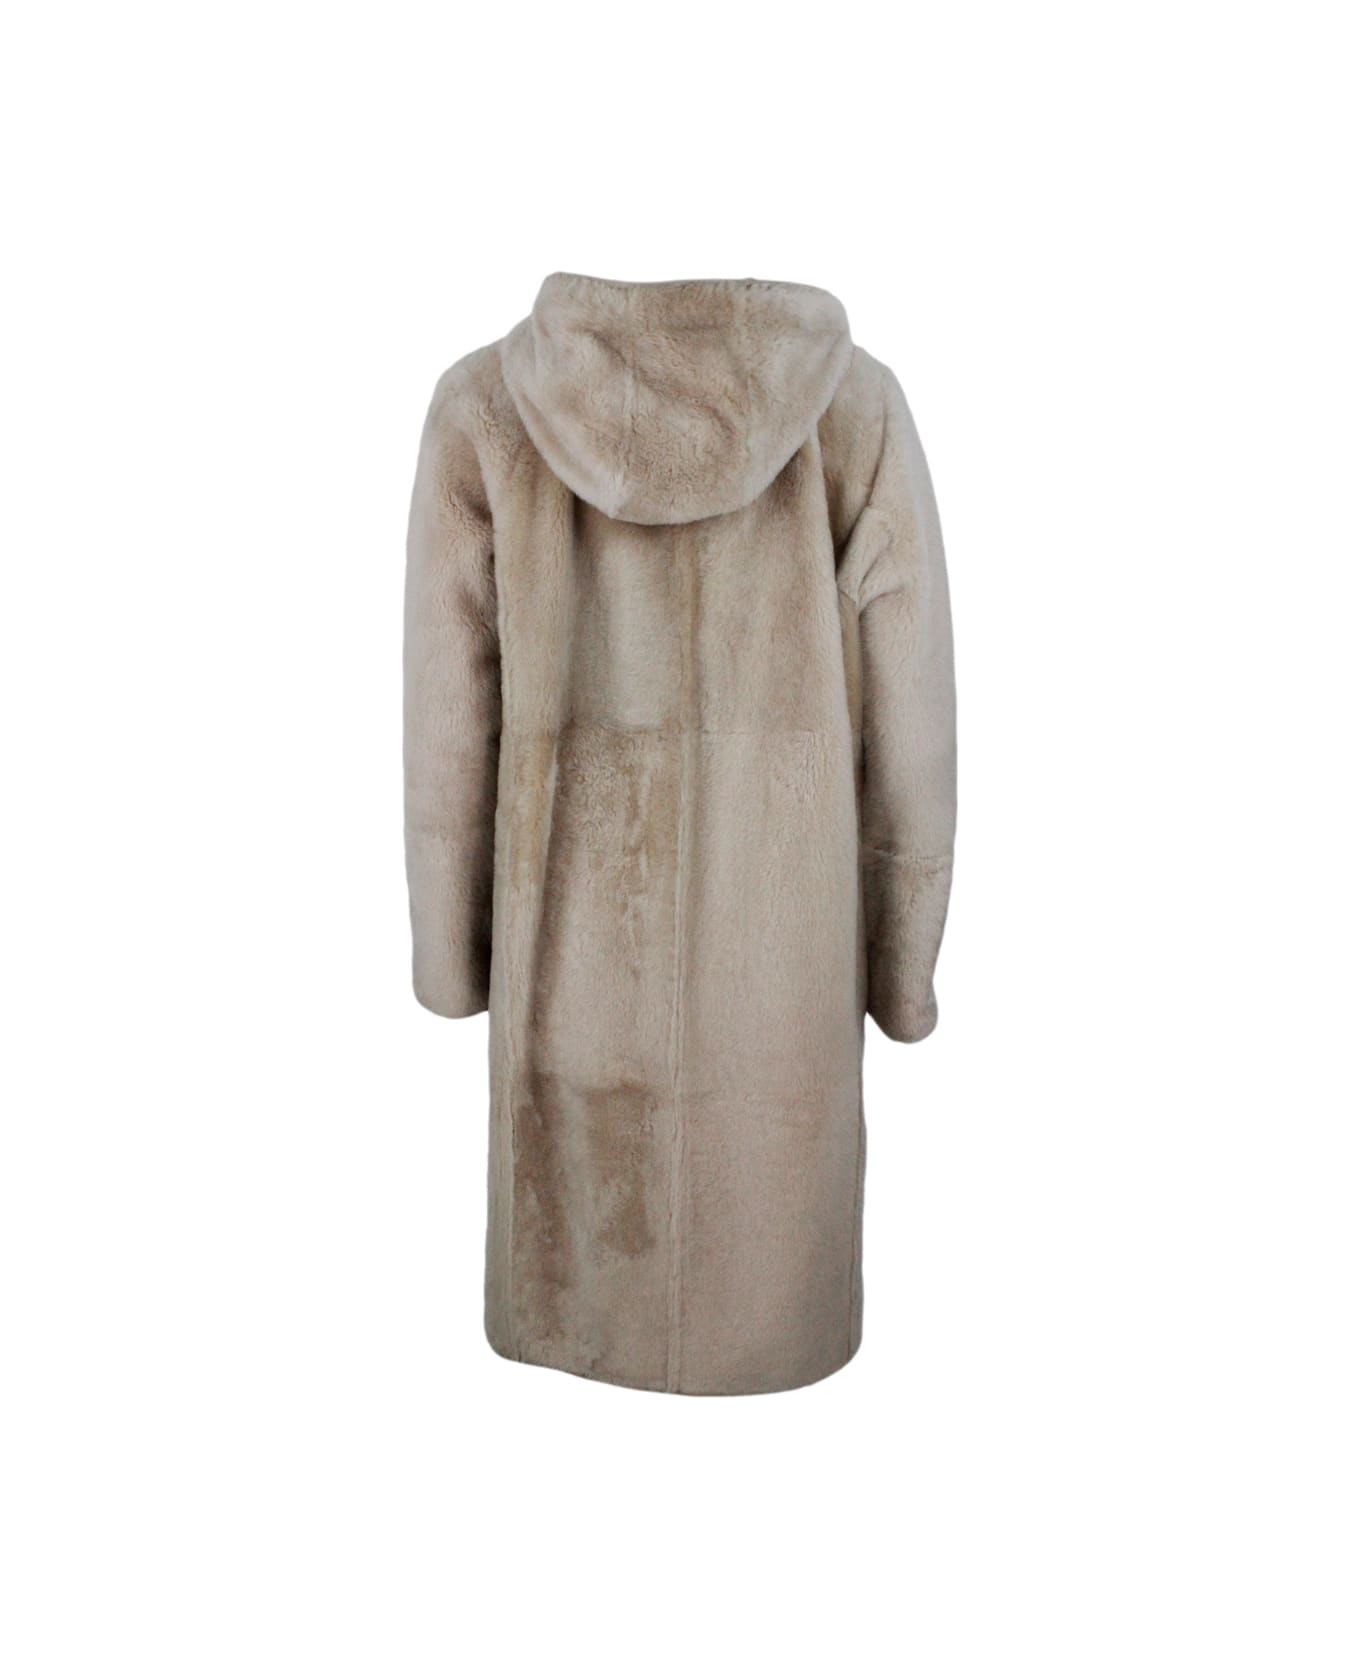 Brunello Cucinelli Reversible Coat In Soft Shearling With Hood - Beige コート